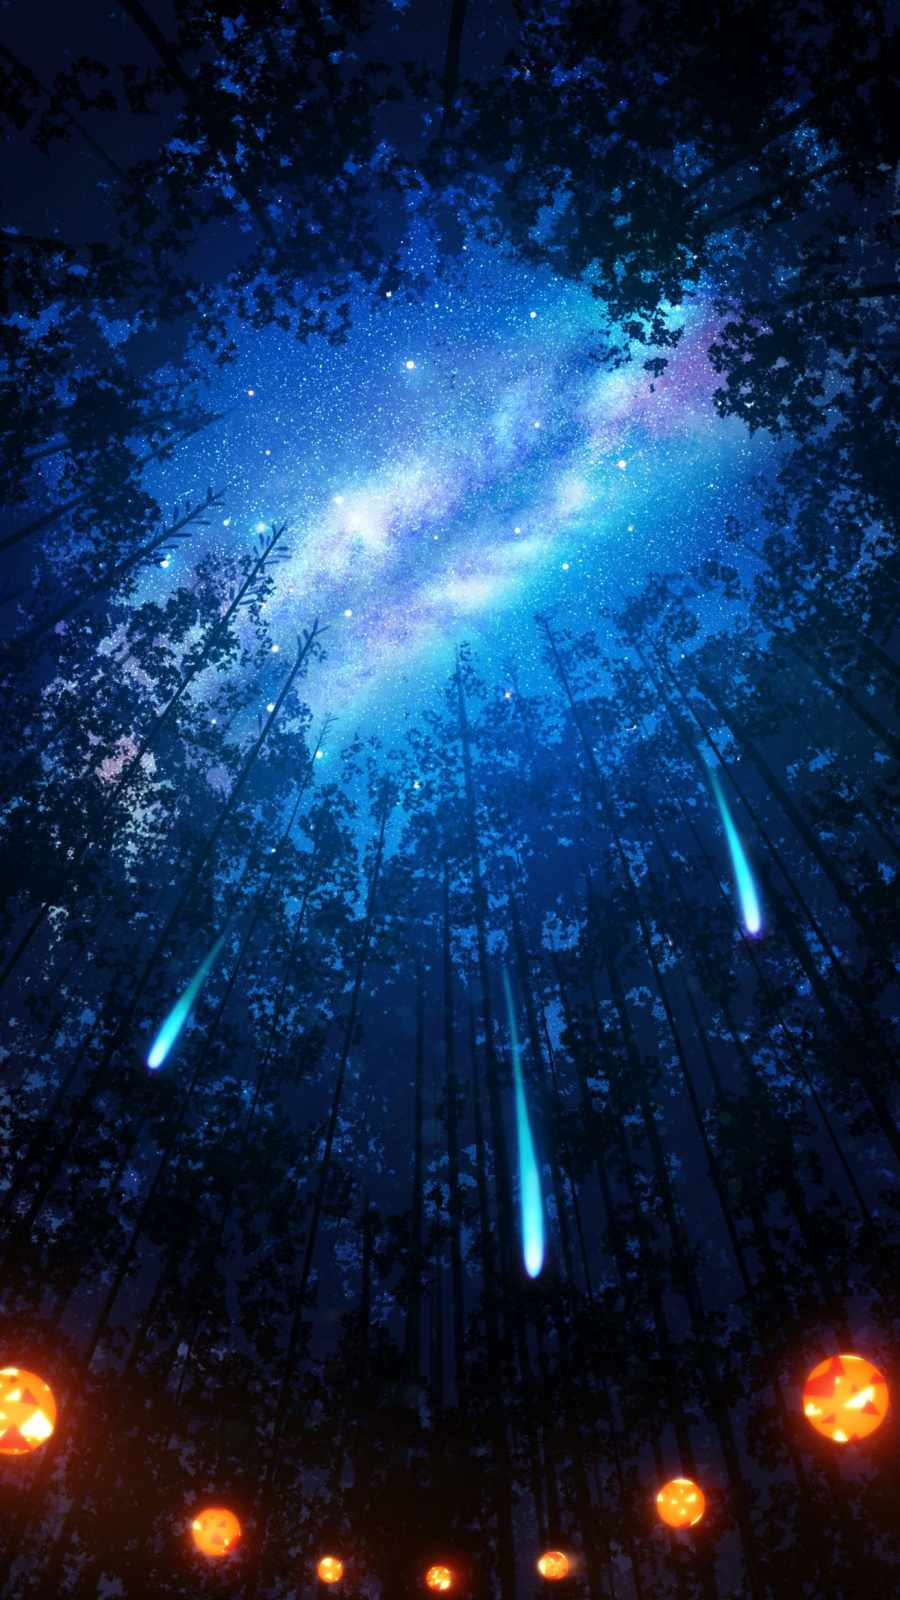 Magical Space IPhone Wallpaper  IPhone Wallpapers